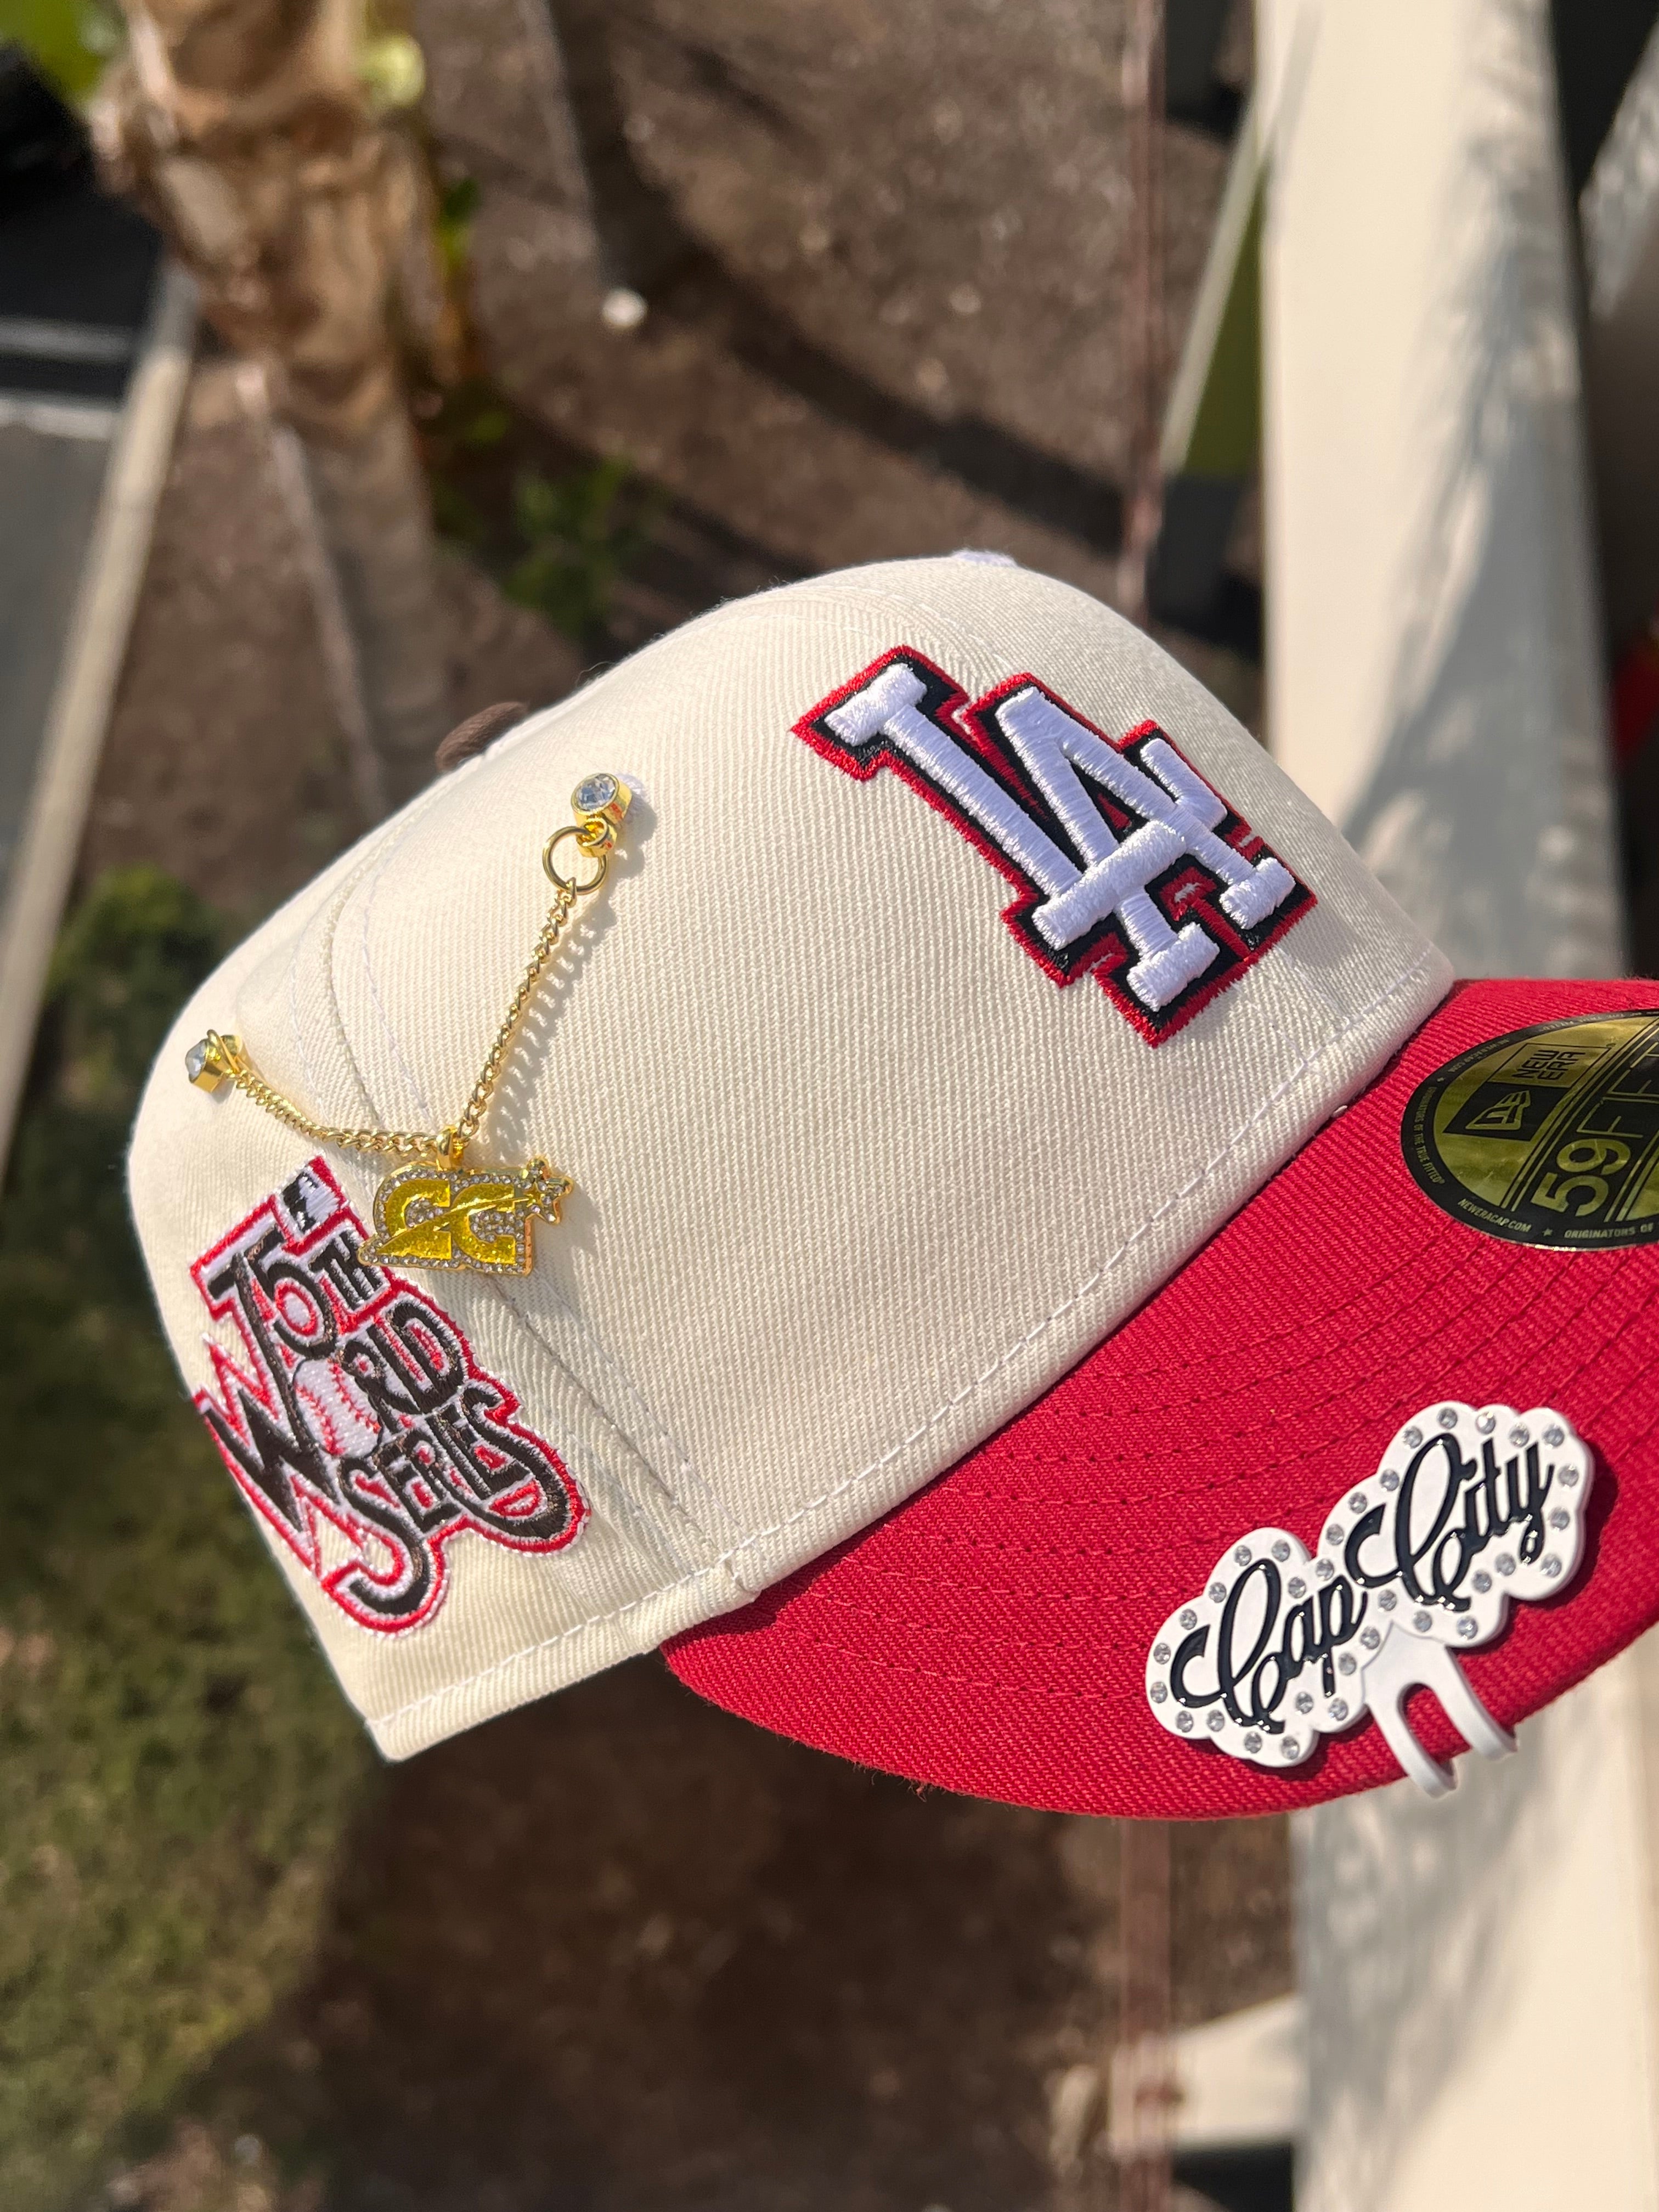 NEW ERA EXCLUSIVE 59FIFTY CHROME WHITE/RED LOS ANGELES DODGERS W/ 75TH WORLD SERIES PATCH